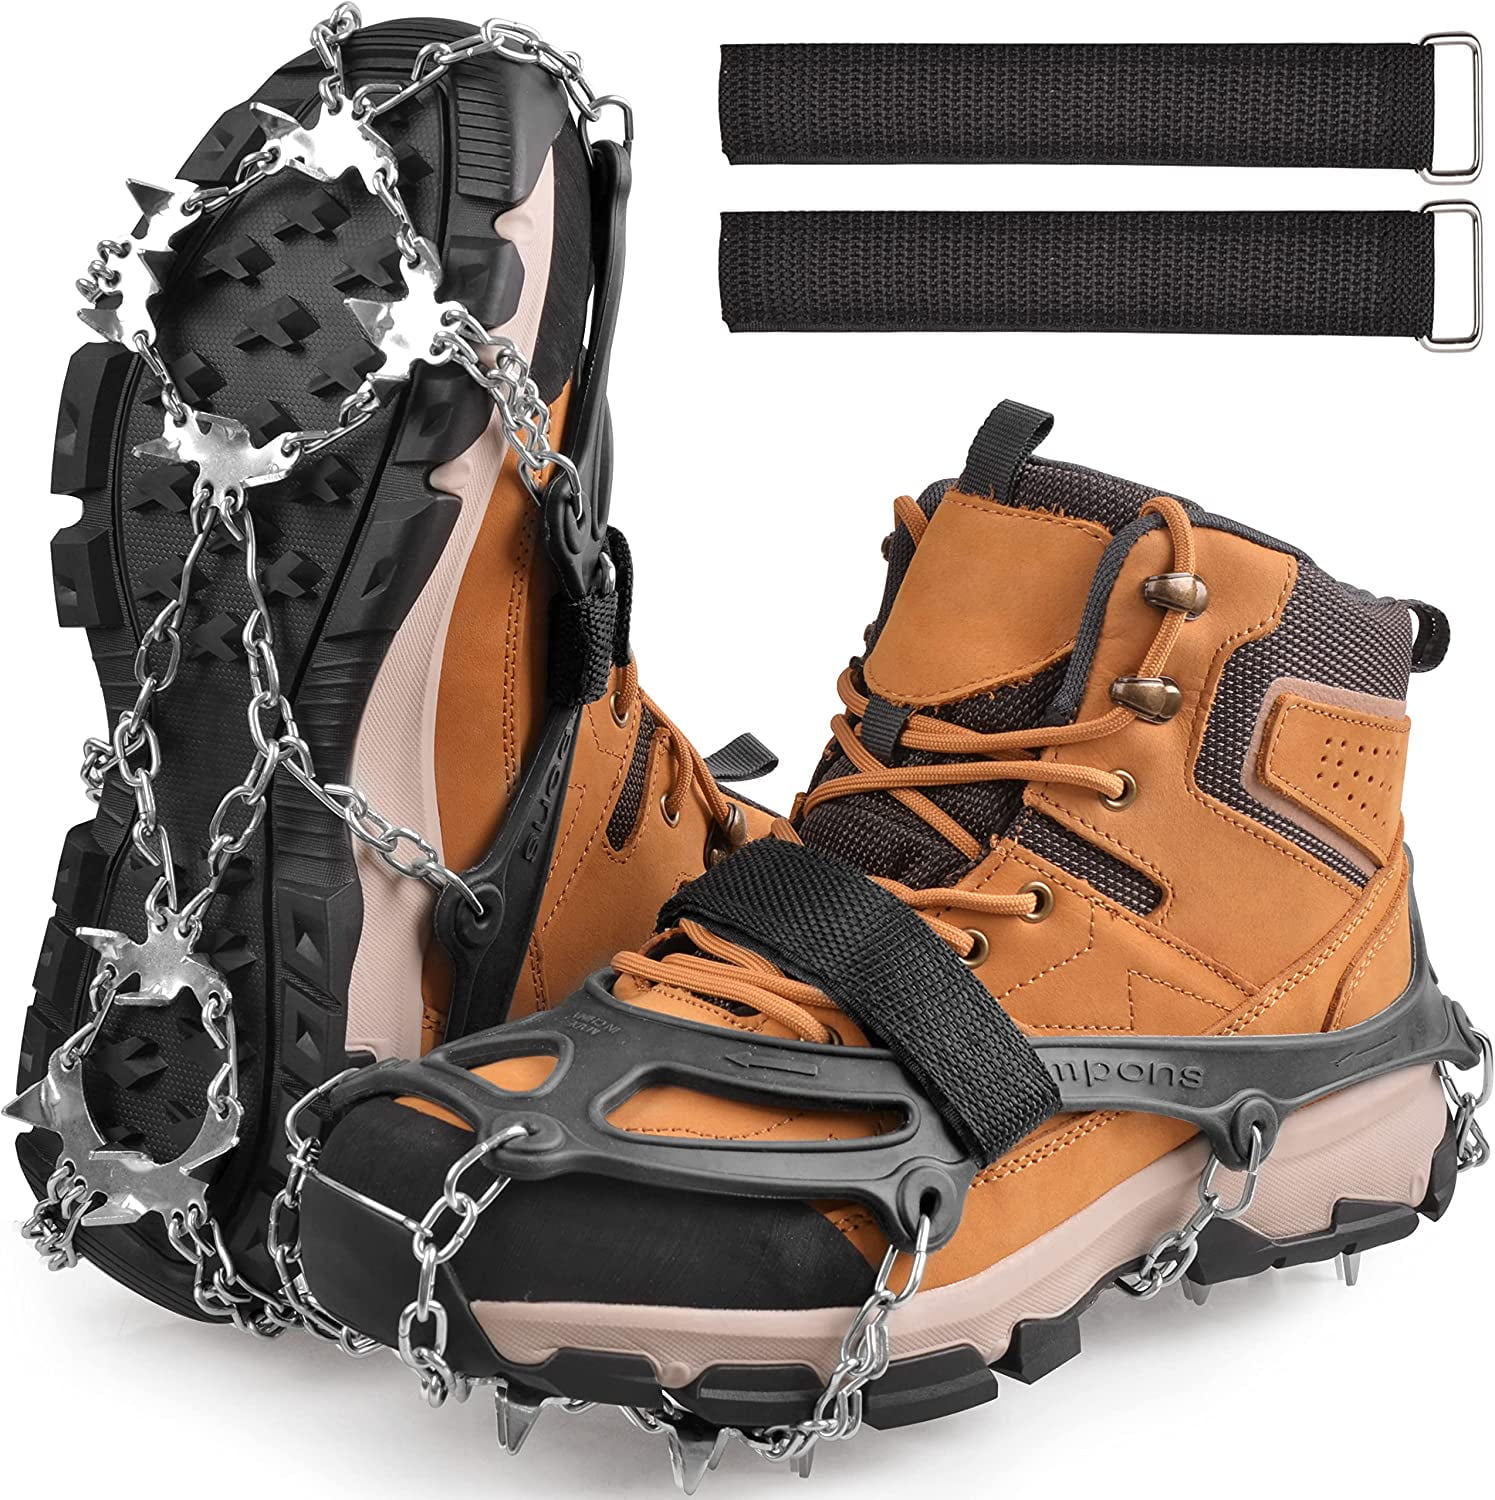 Ice Cleats Snows Crampons Walk Traction Cleats for Boots Shoes, 19 Teeths  Grippers Men Women Anti Slip Traction Cleats for Hiking Fishing  Mountaineering 